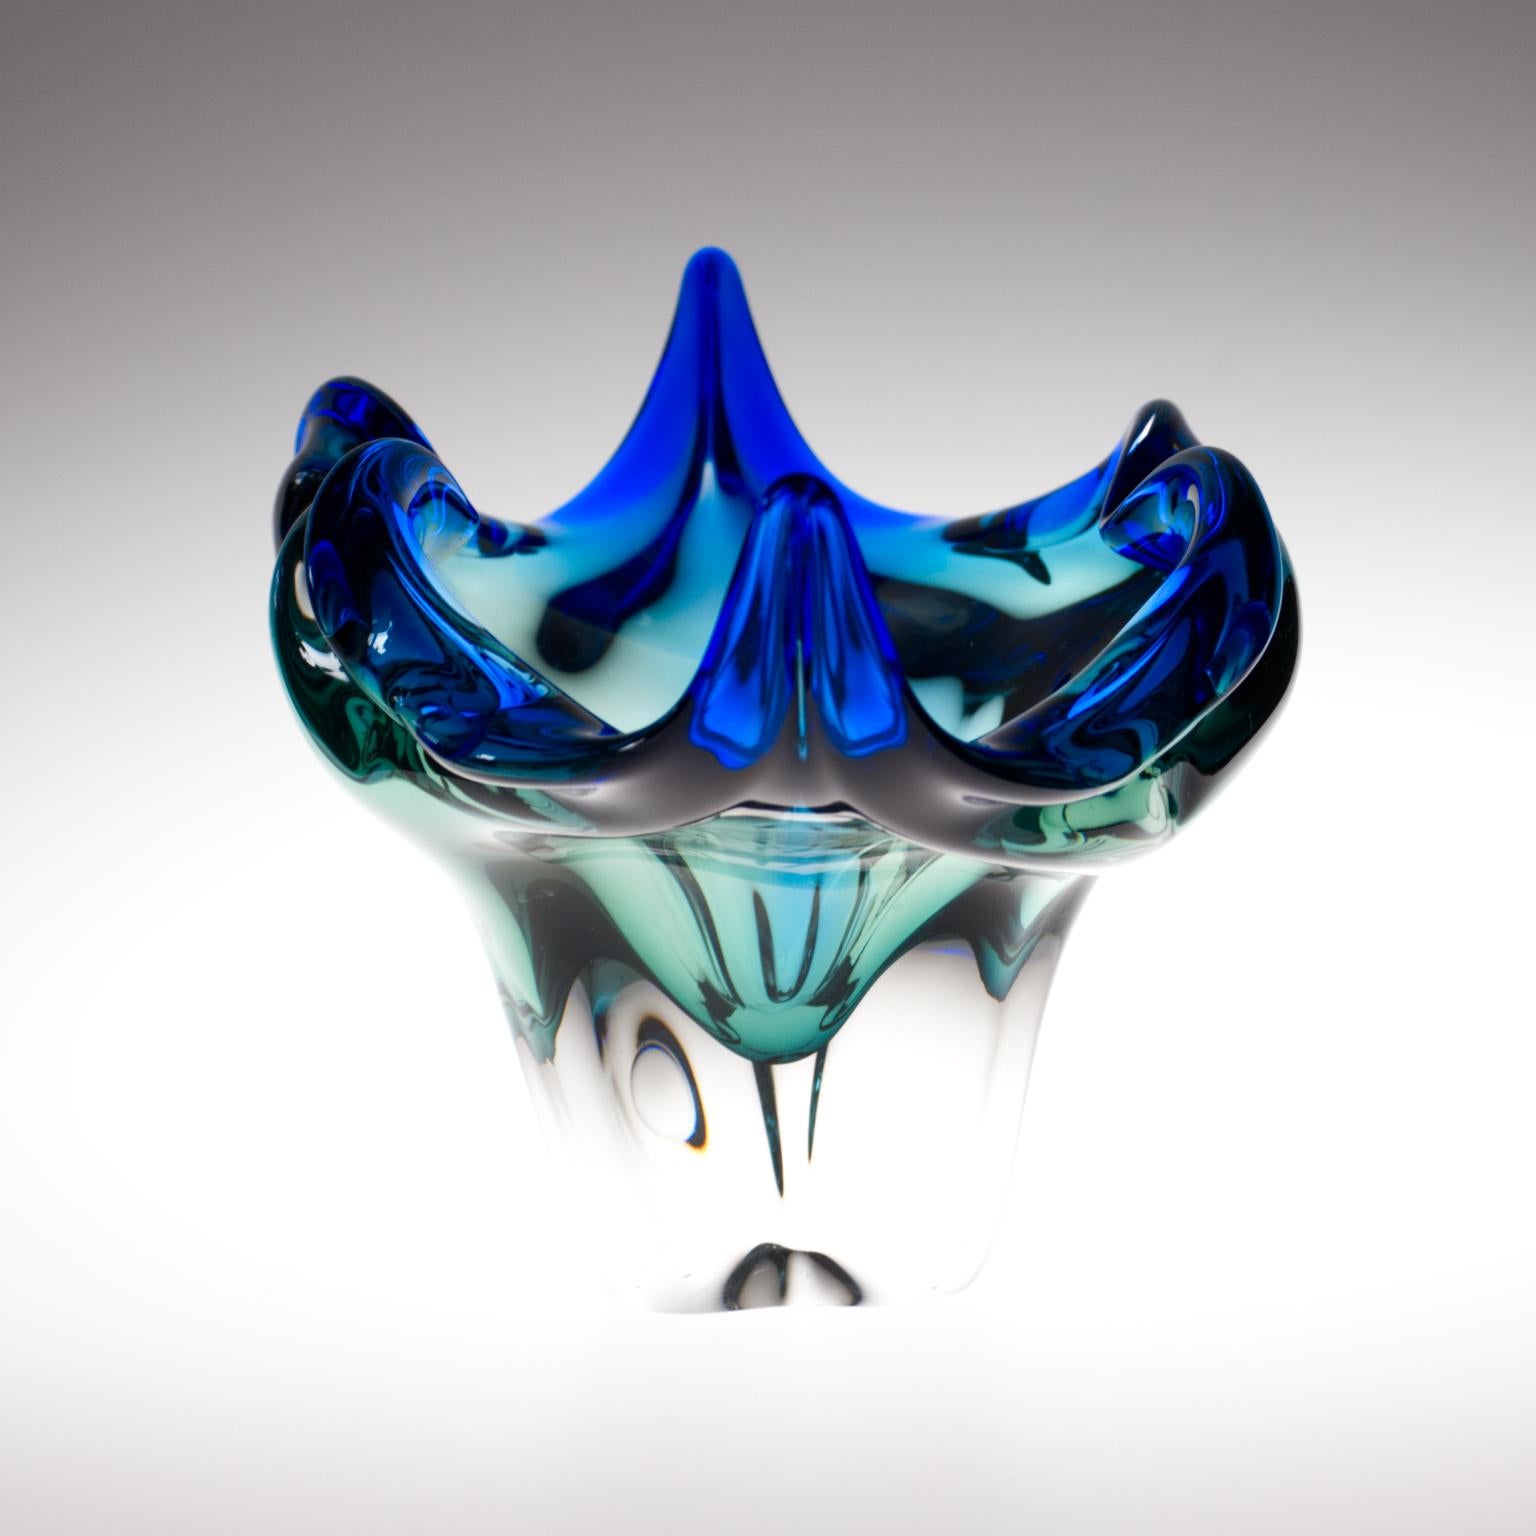 This highly sculptural winged bowl was designed by the talented Josef Hospodka for the Chribska Glassworks in 1960s. During his time as chief designer at Chribska.

The Chribska Glassworks has a celebrated history dating back to the 15th century.